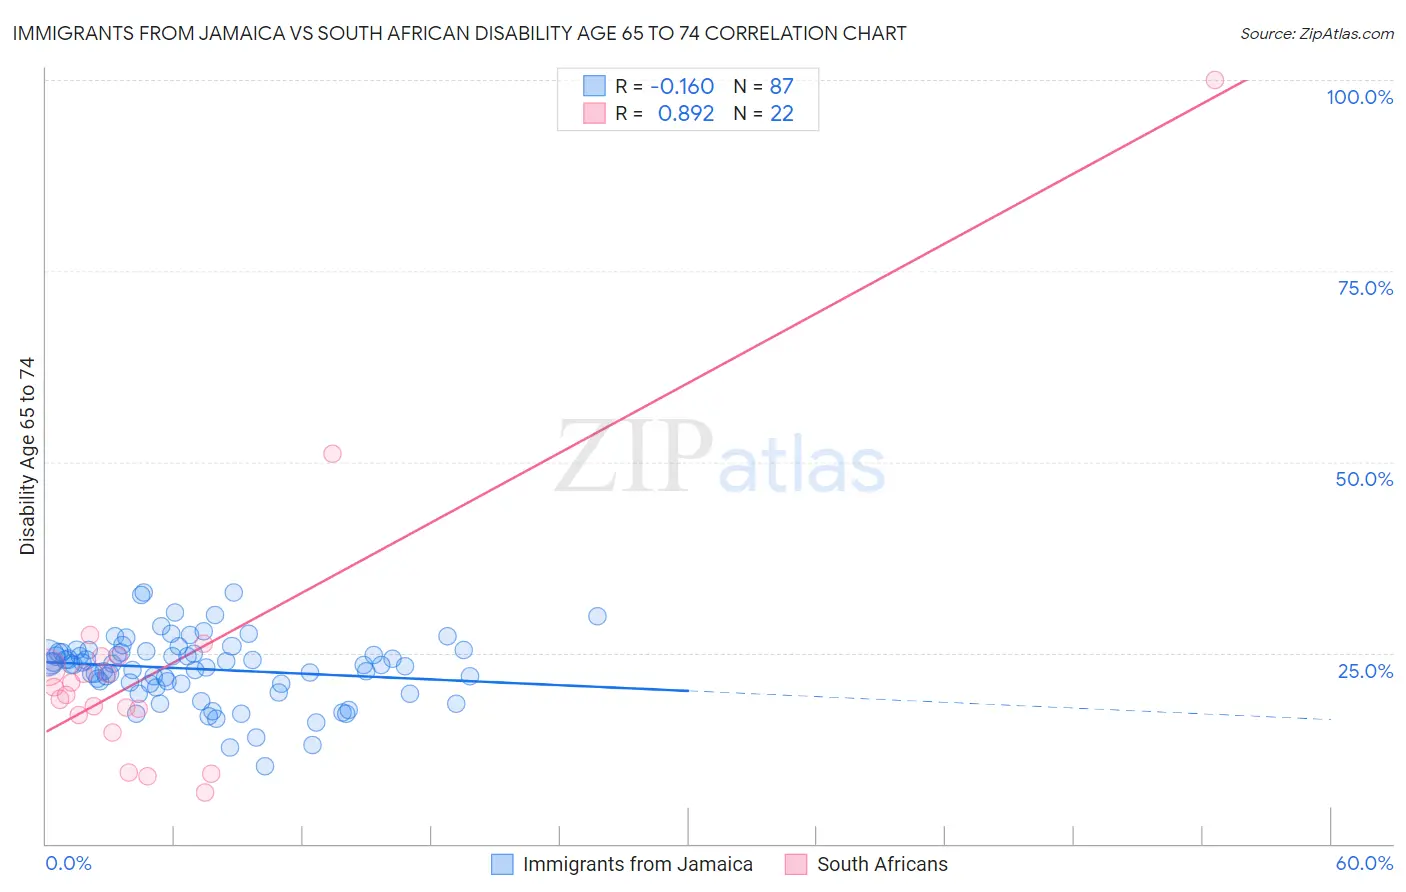 Immigrants from Jamaica vs South African Disability Age 65 to 74